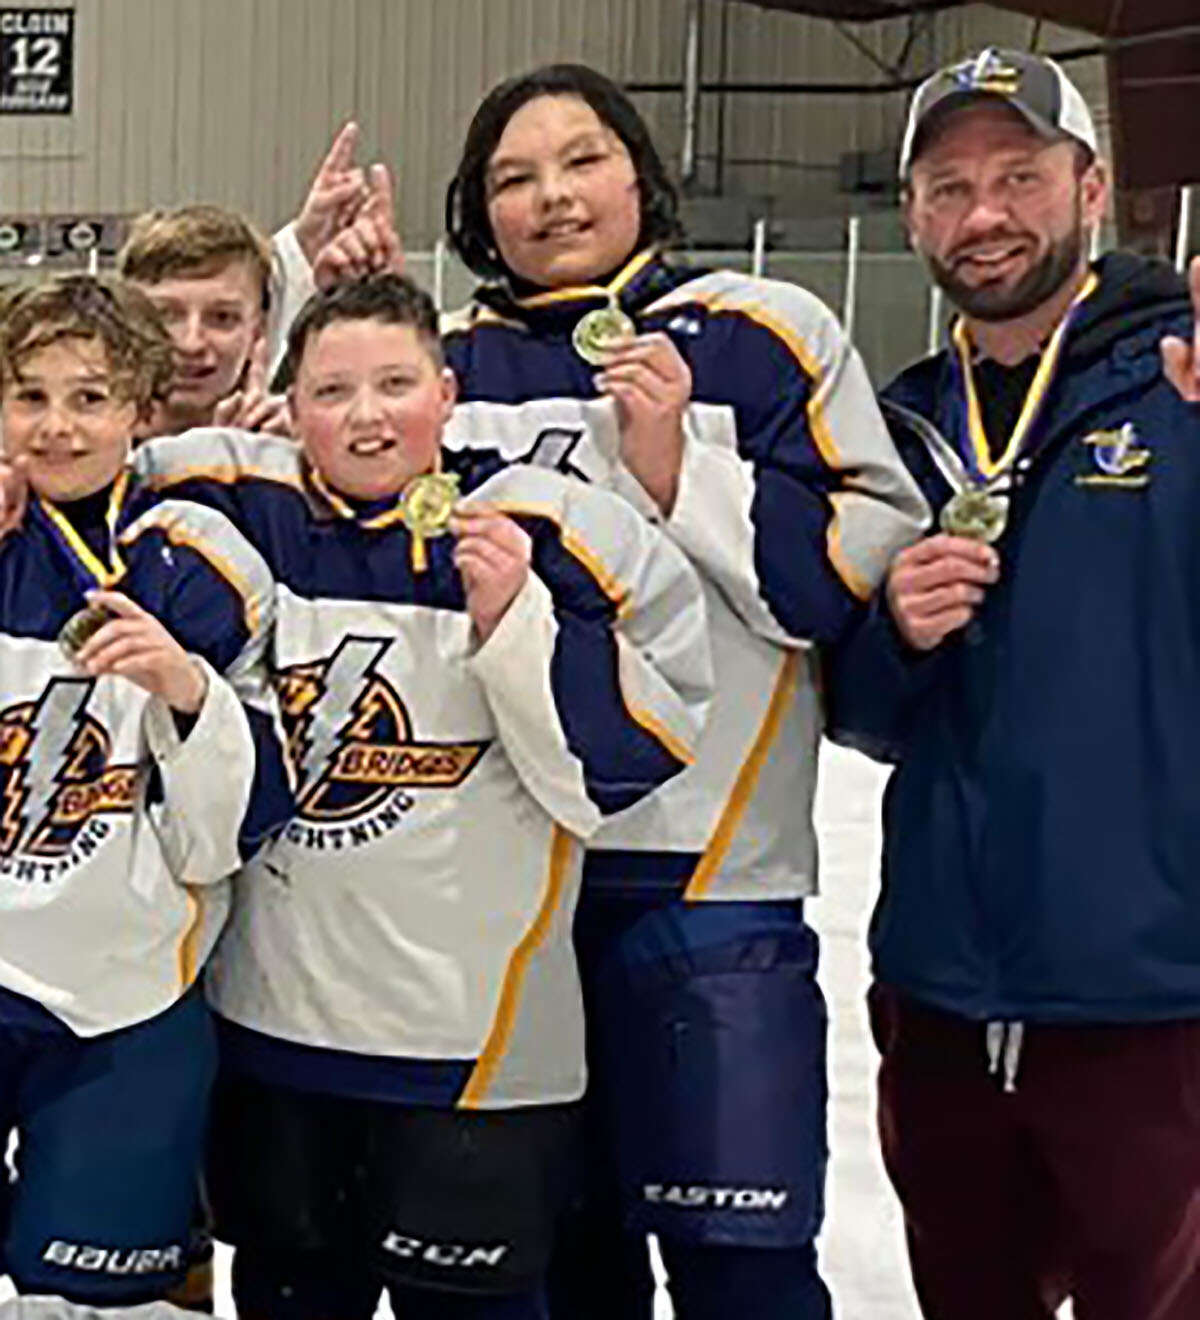 James Mitchell, fsr right, celebrates with a Twin Bridges Lightning club team after winning a tournament last season. Mitchell has been named the next head coach of the East Alton-Wood River High Oilers hockey team of the Mississippi Valley Club Hockey Association.